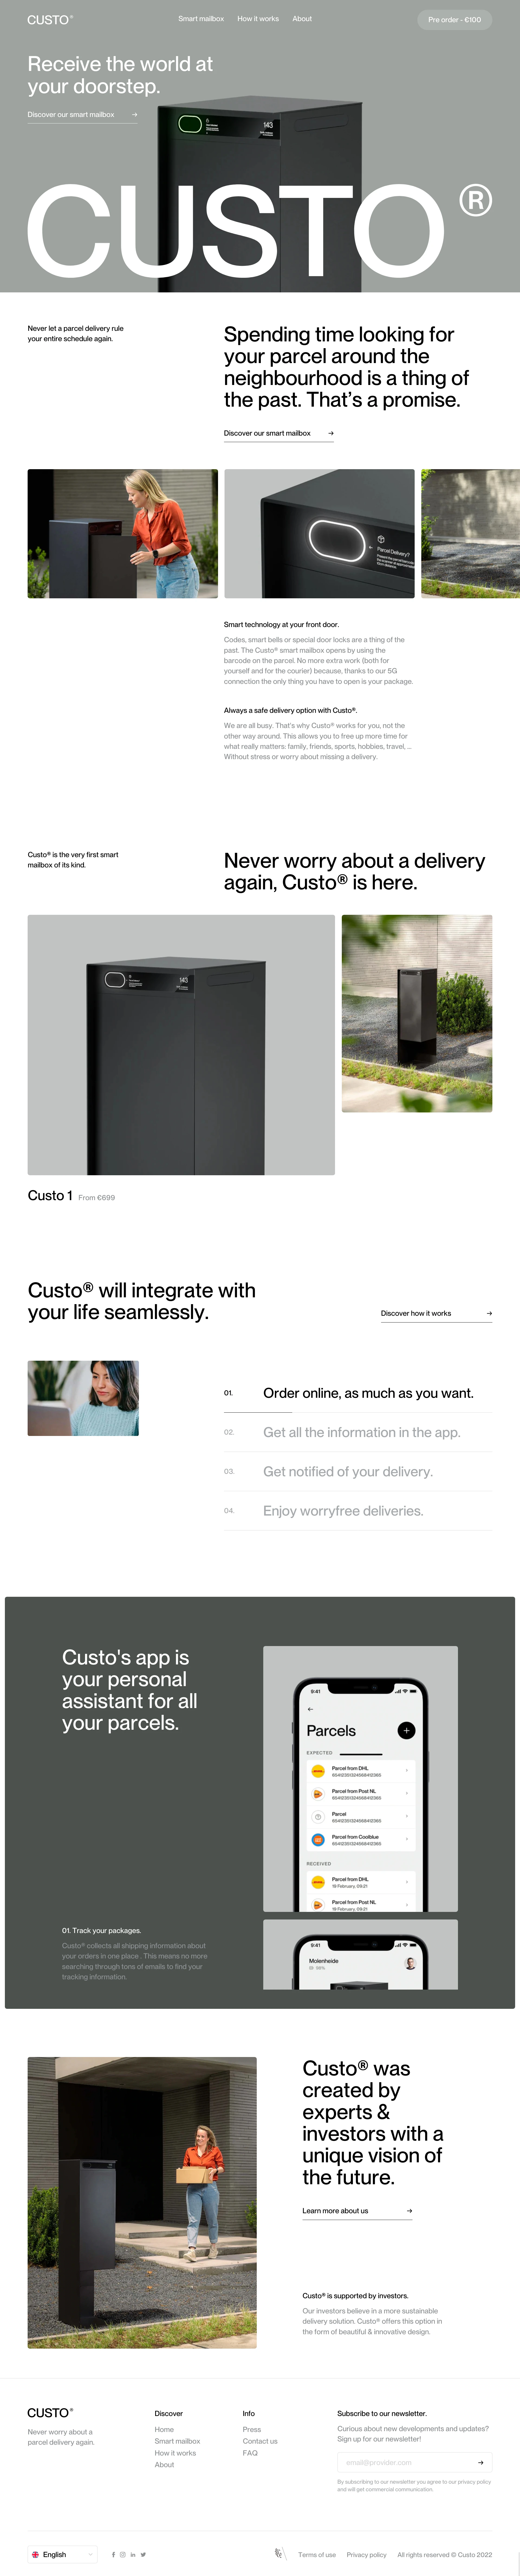 Custo Landing Page Example: Spending time looking for your parcel around the neighbourhood is a thing of the past. That’s a promise.